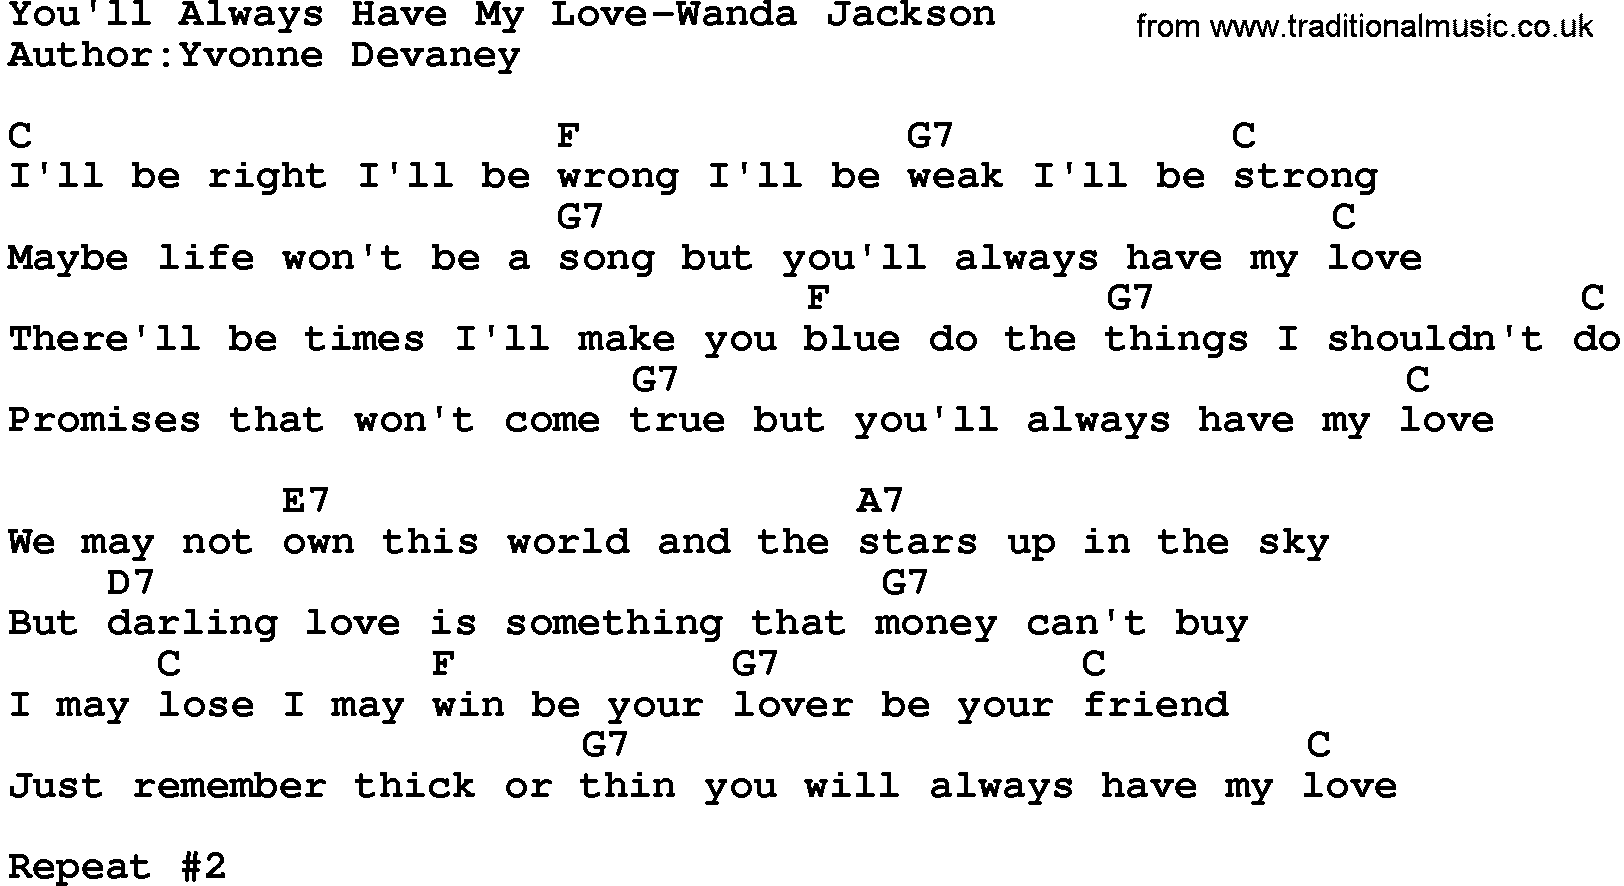 Country music song: You'll Always Have My Love-Wanda Jackson lyrics and chords